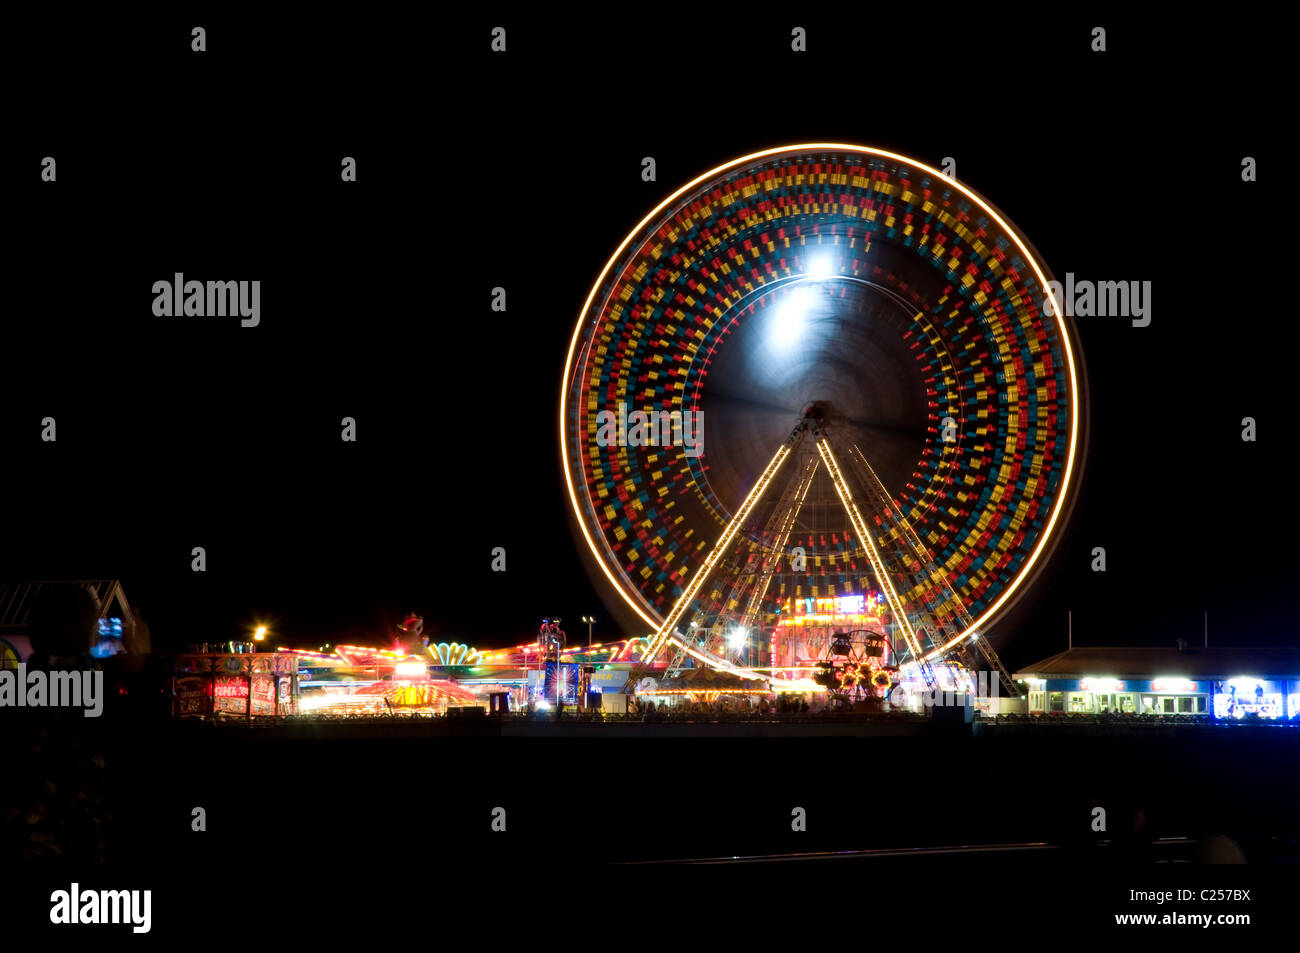 Big wheel on the Centre (Tower) Pier at Blackpool, Northwest England, photographed at night. Stock Photo